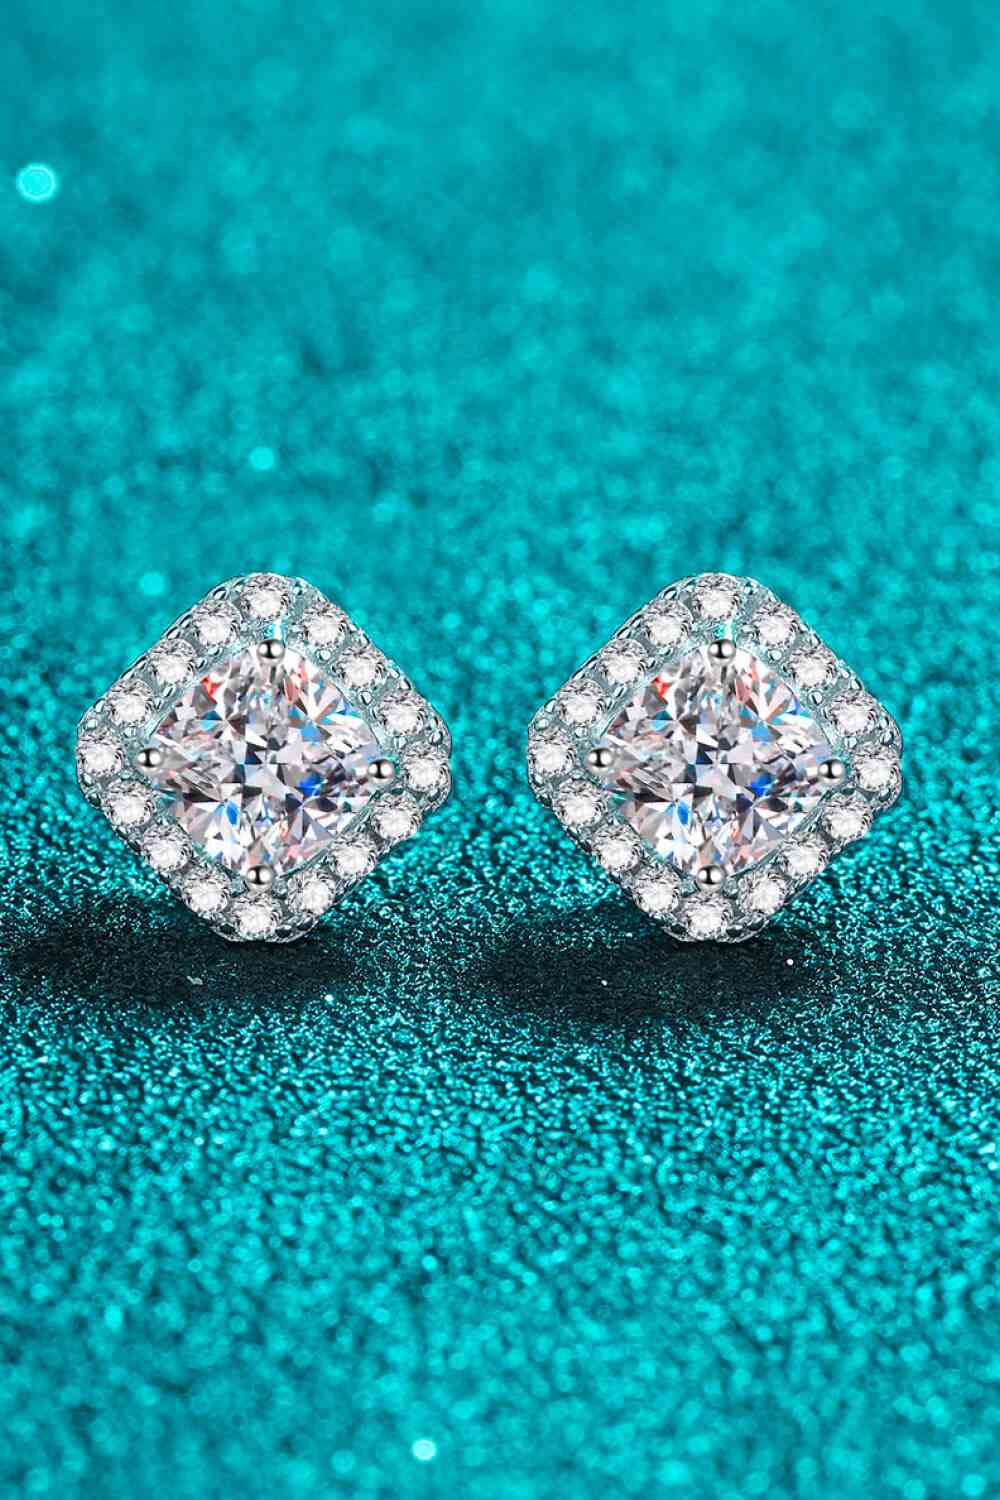 925 Sterling Silver Inlaid 2 Carat Moissanite Square Stud Earrings - lolaluxeshop